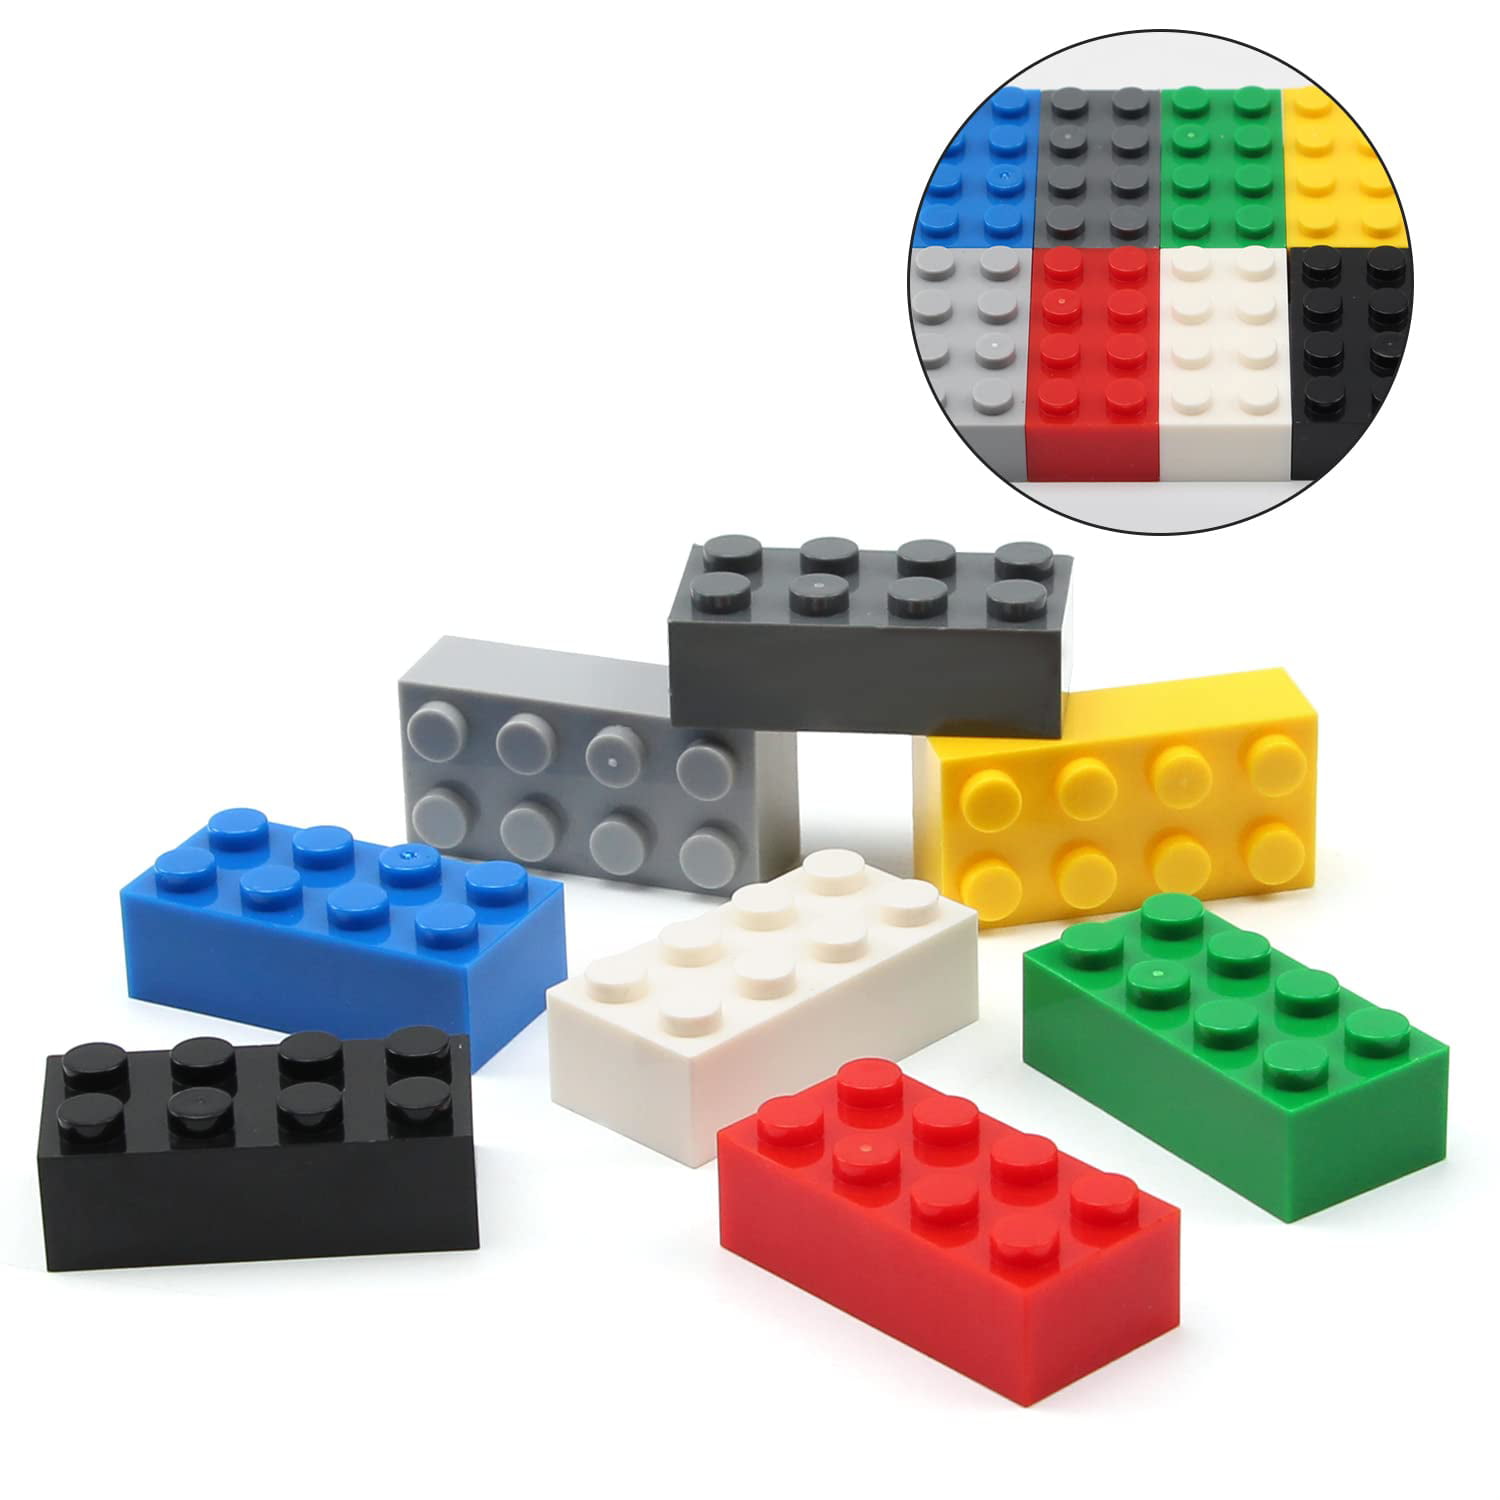 Assorted Multicolored SINGLE Lego pieces with 2 design trays 200+ pieces